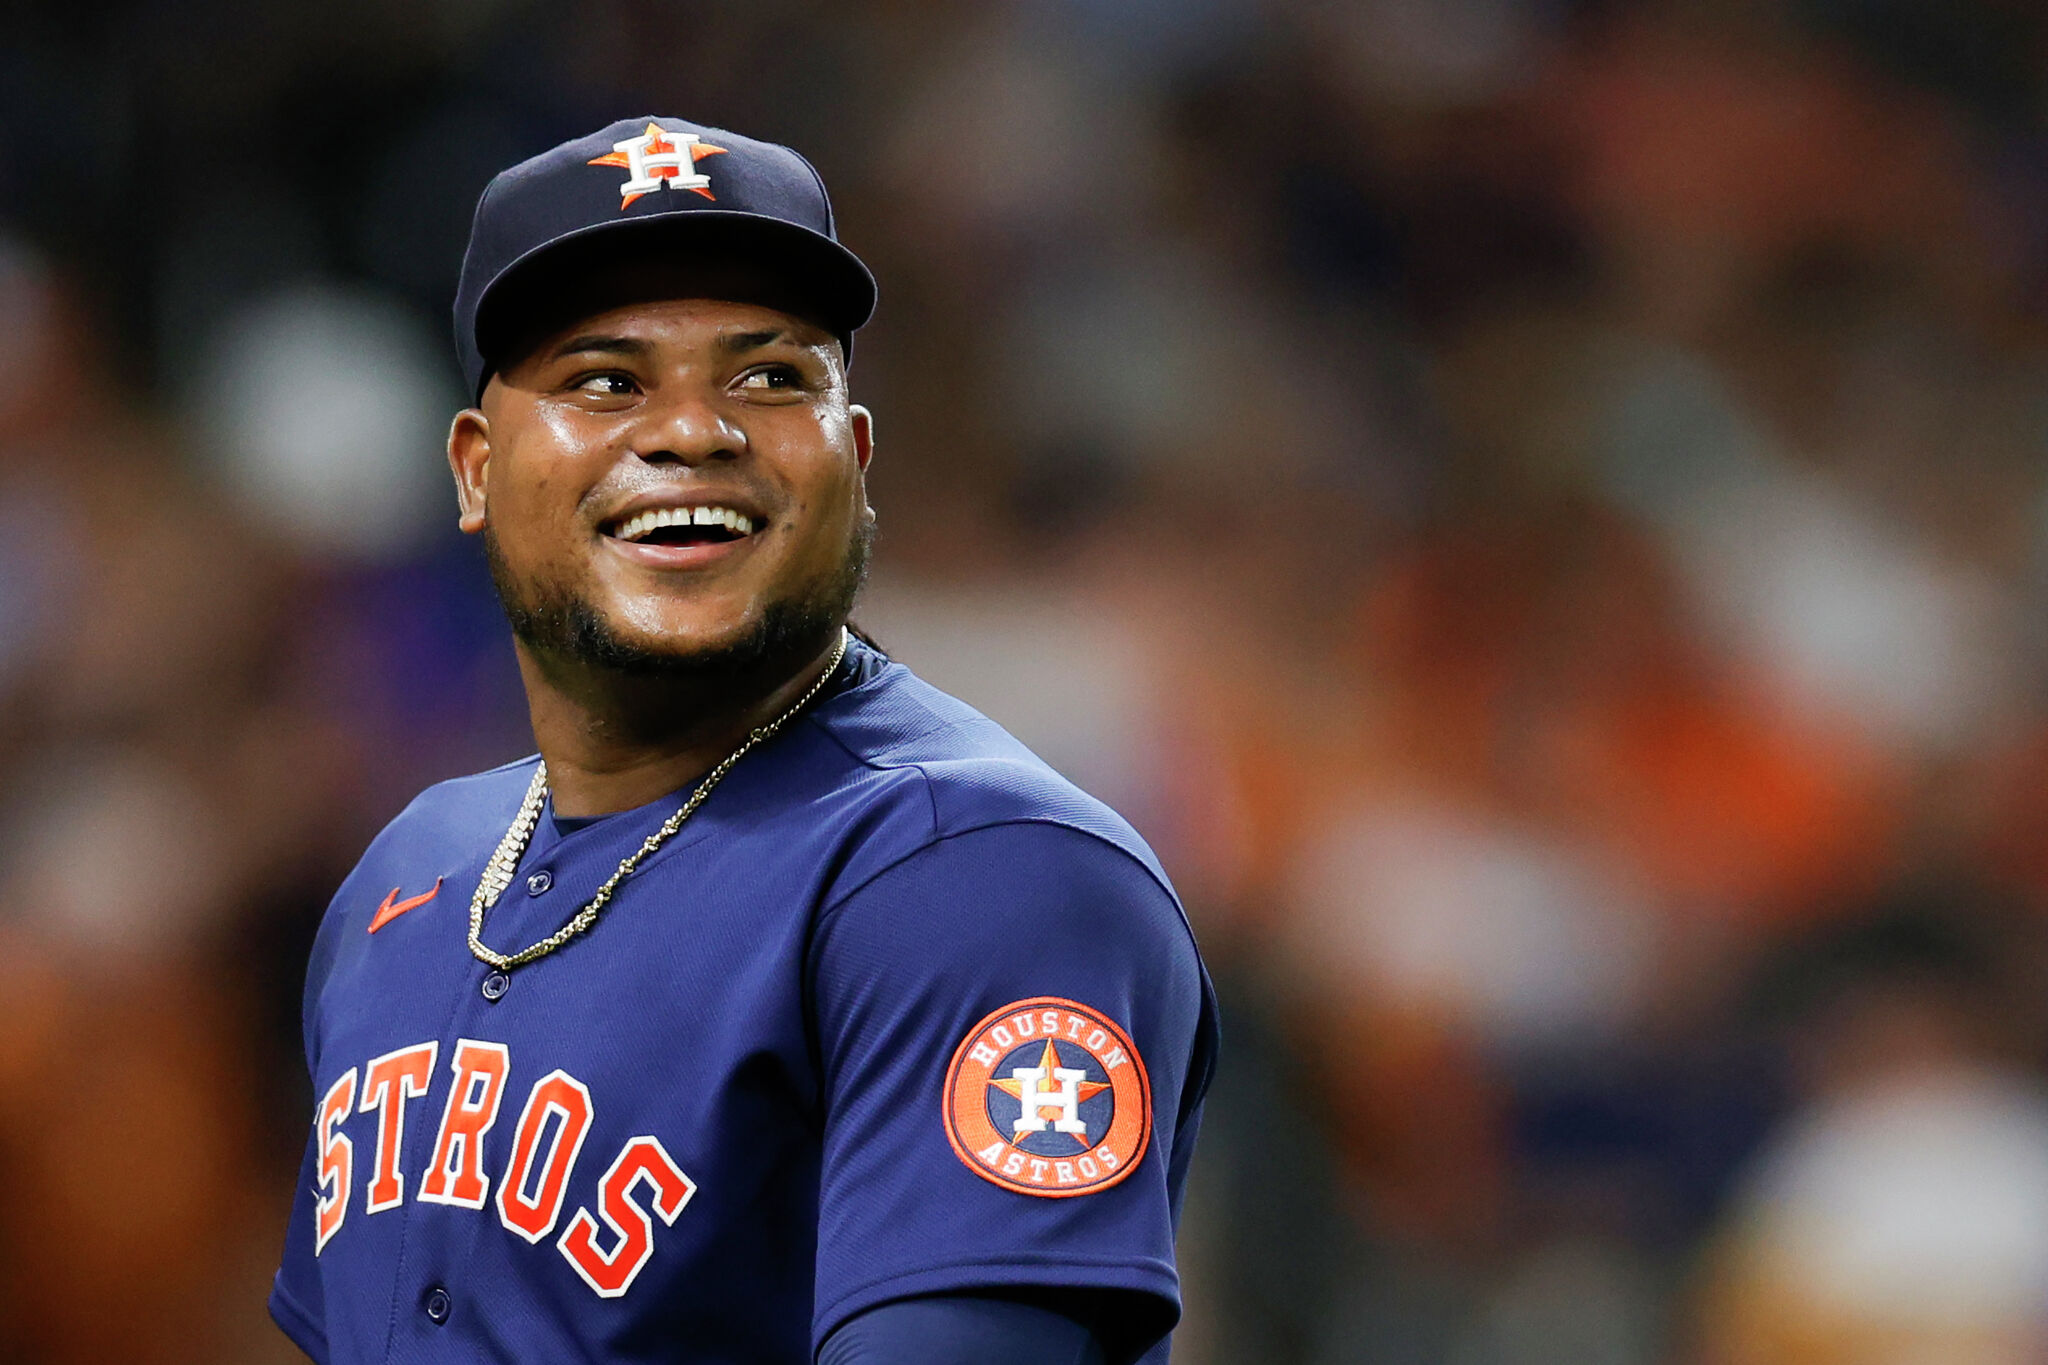 Predicting the Astros Opening Day Rotation